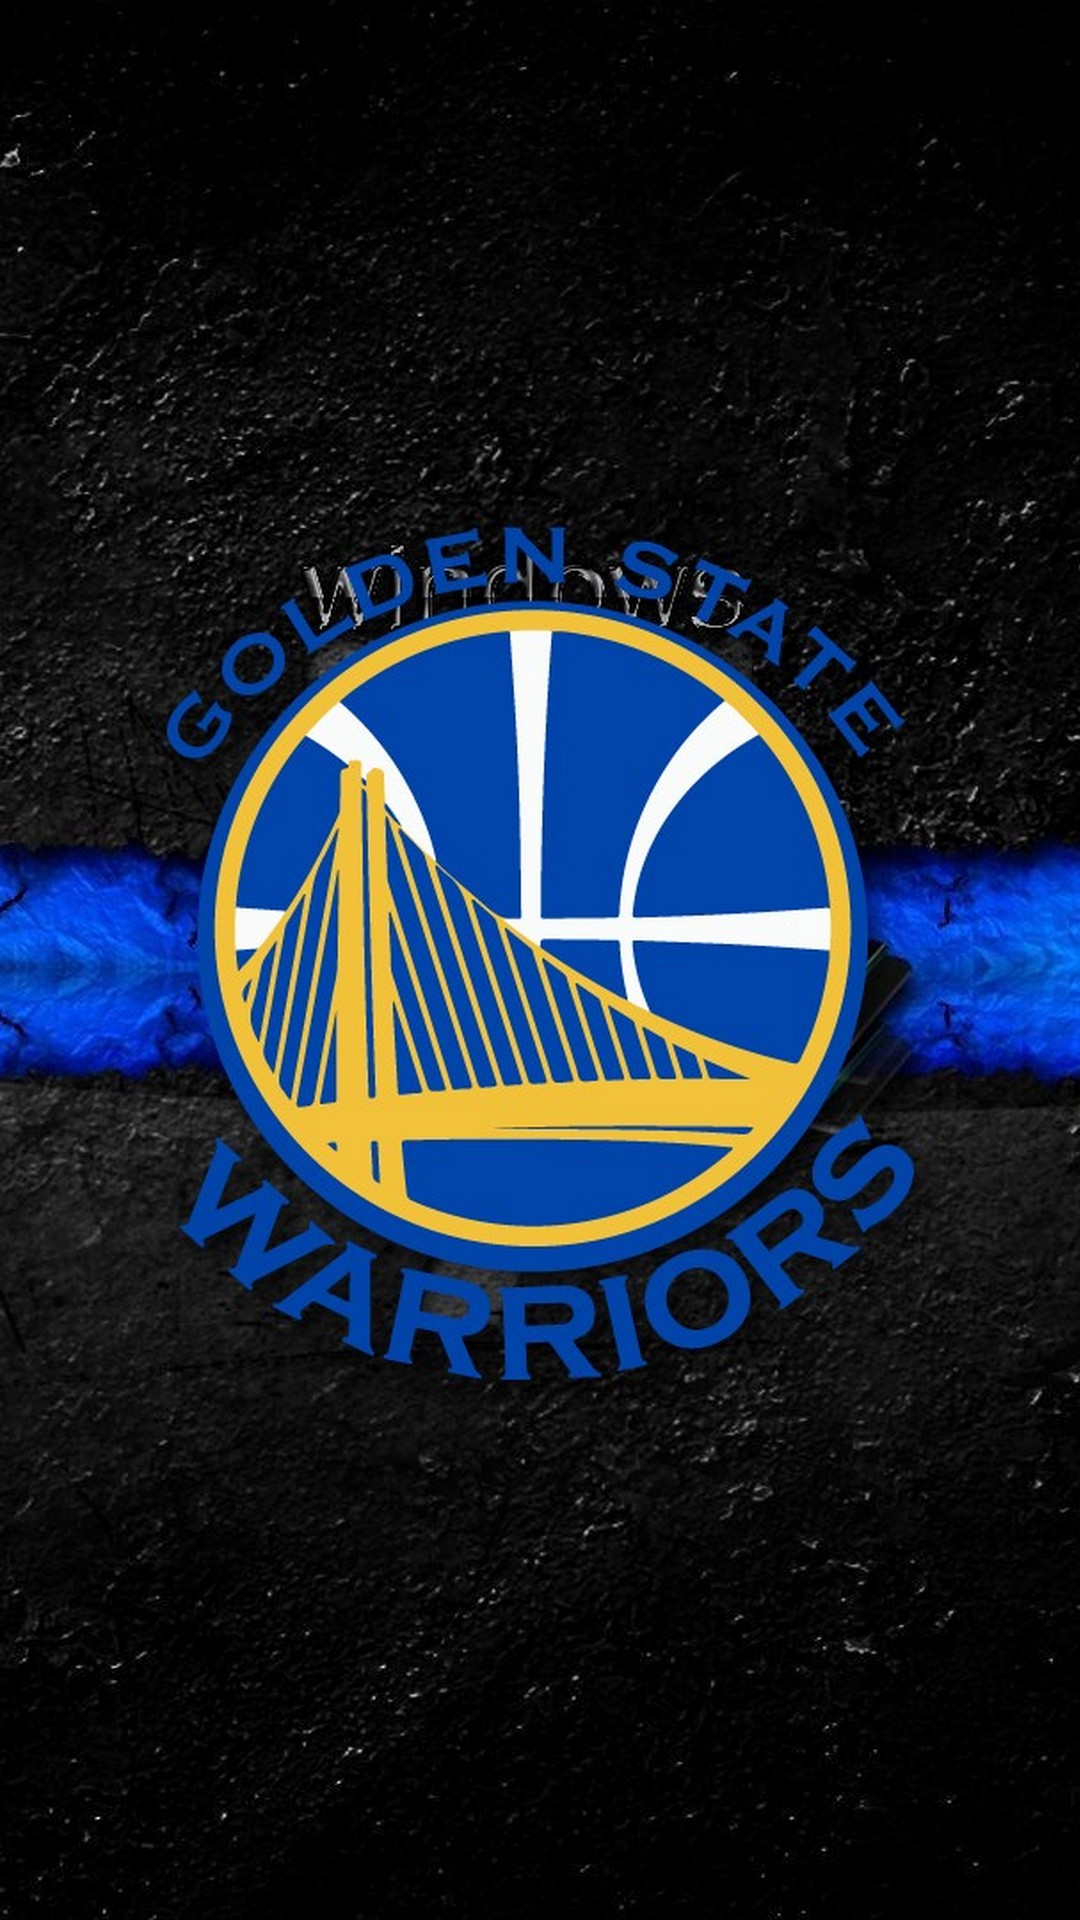 Golden State Warriors iPhone Wallpaper with image resolution 1080x1920 pixel. You can make this wallpaper for your iPhone 5, 6, 7, 8, X backgrounds, Mobile Screensaver, or iPad Lock Screen